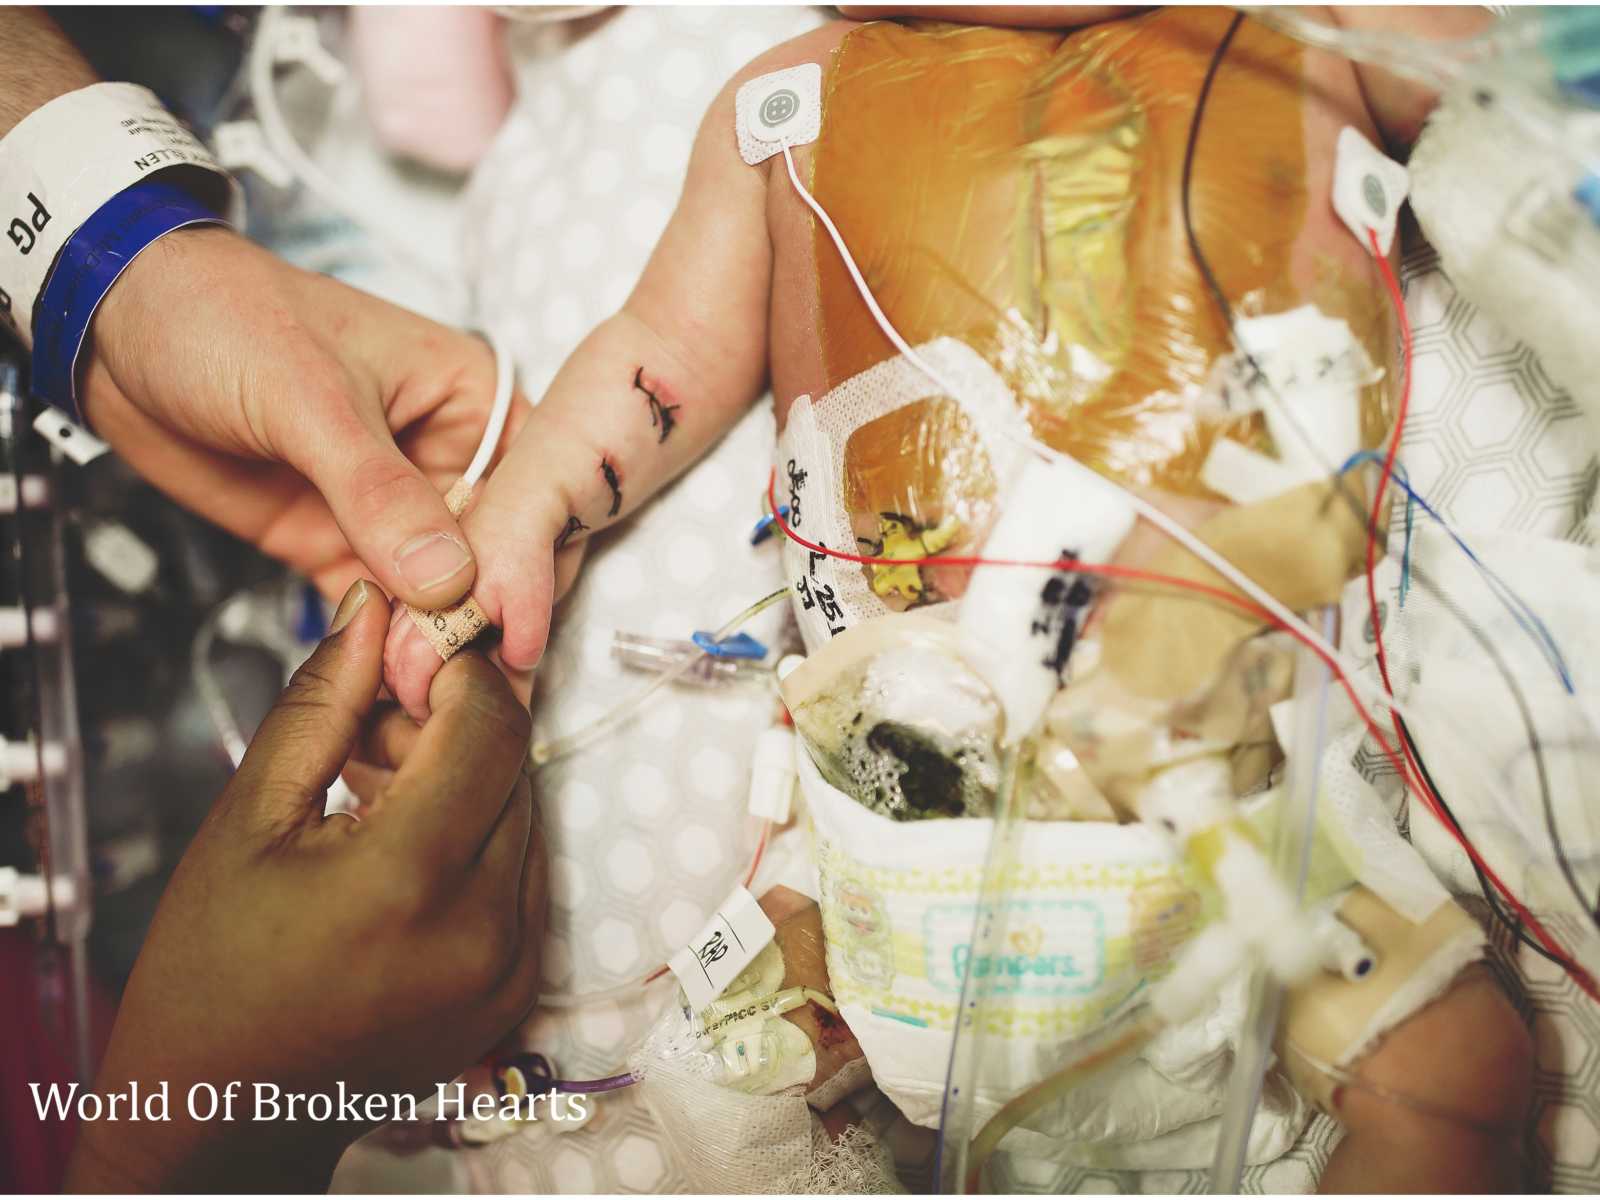 Close up of newborn baby with heart defect with stitches in her arm, wires attached to body, holding hands with parents